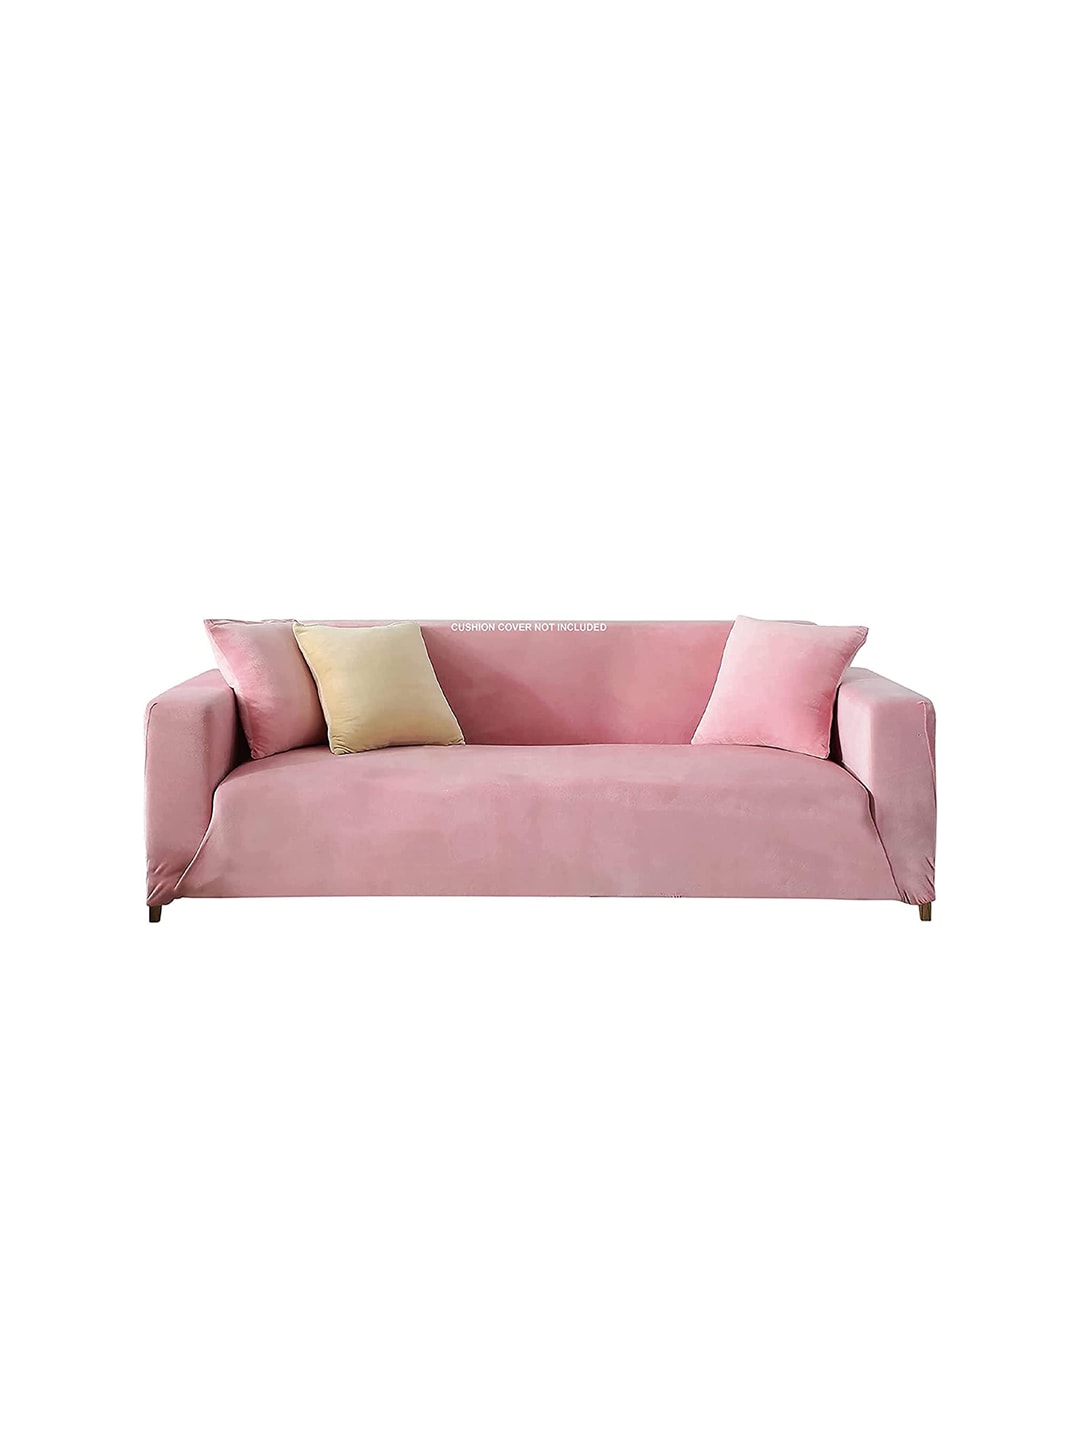 HOUSE OF QUIRK Solid Single Sofa Covers Price in India